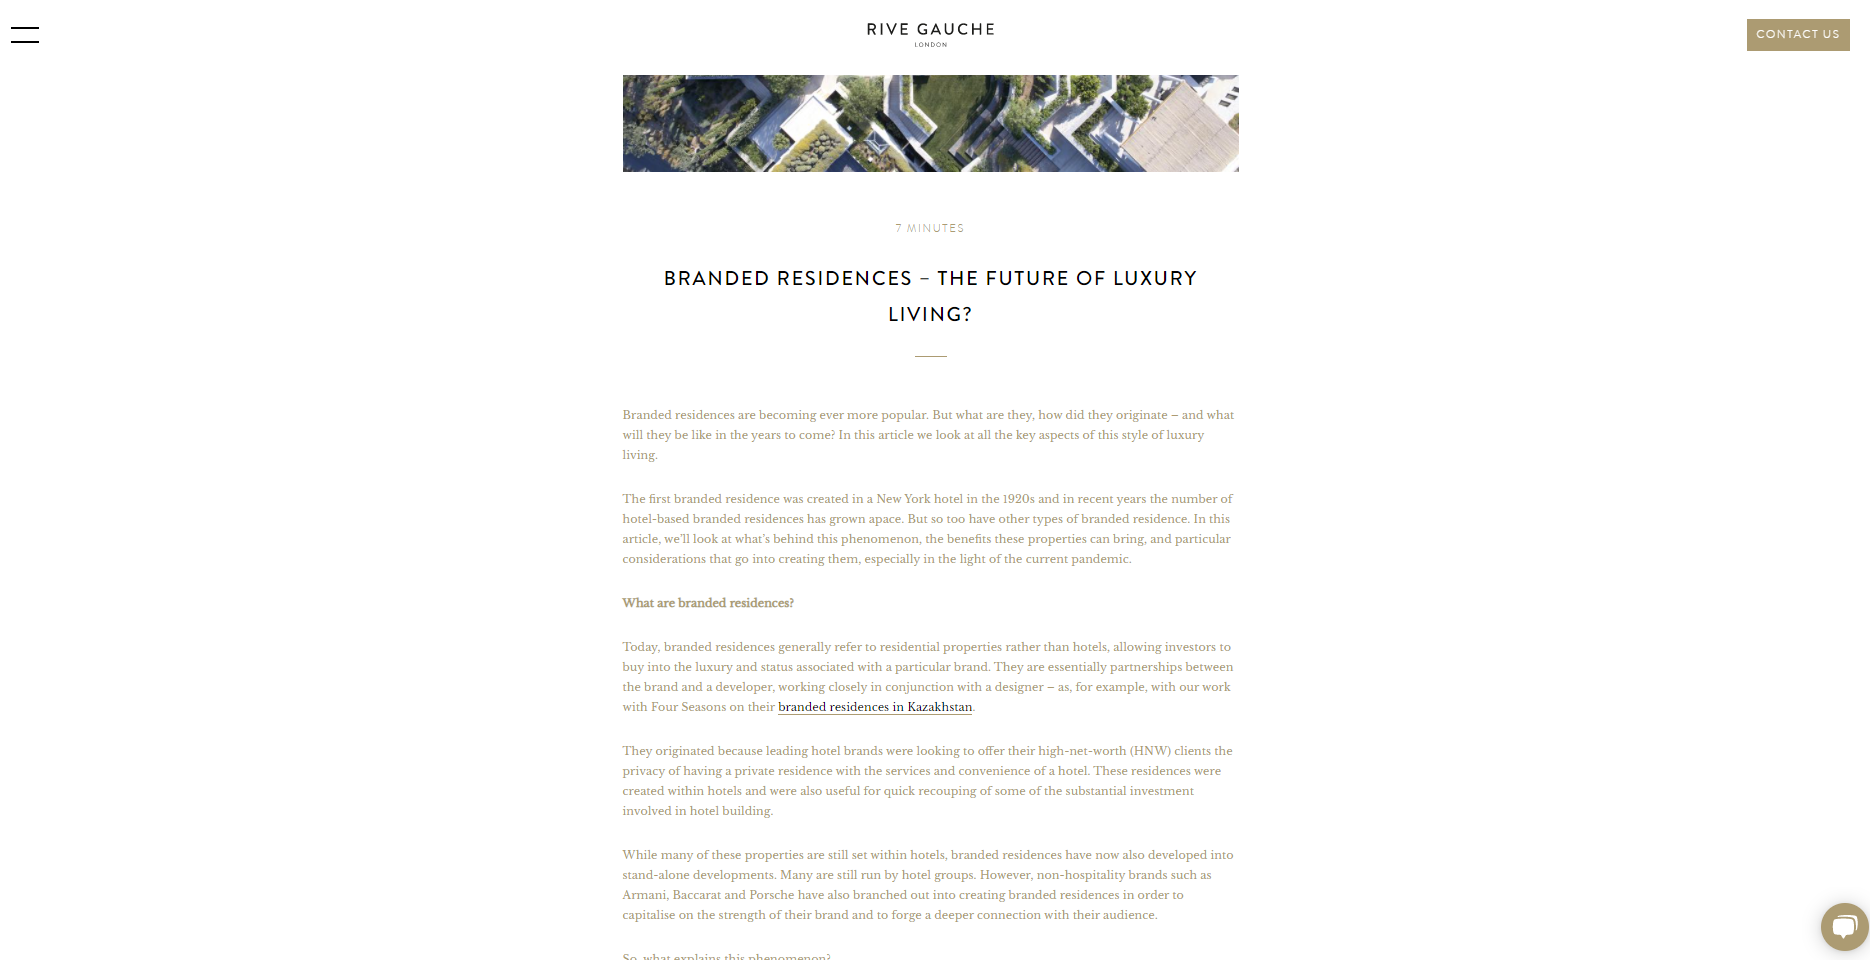 Rive Gauche branded residences article